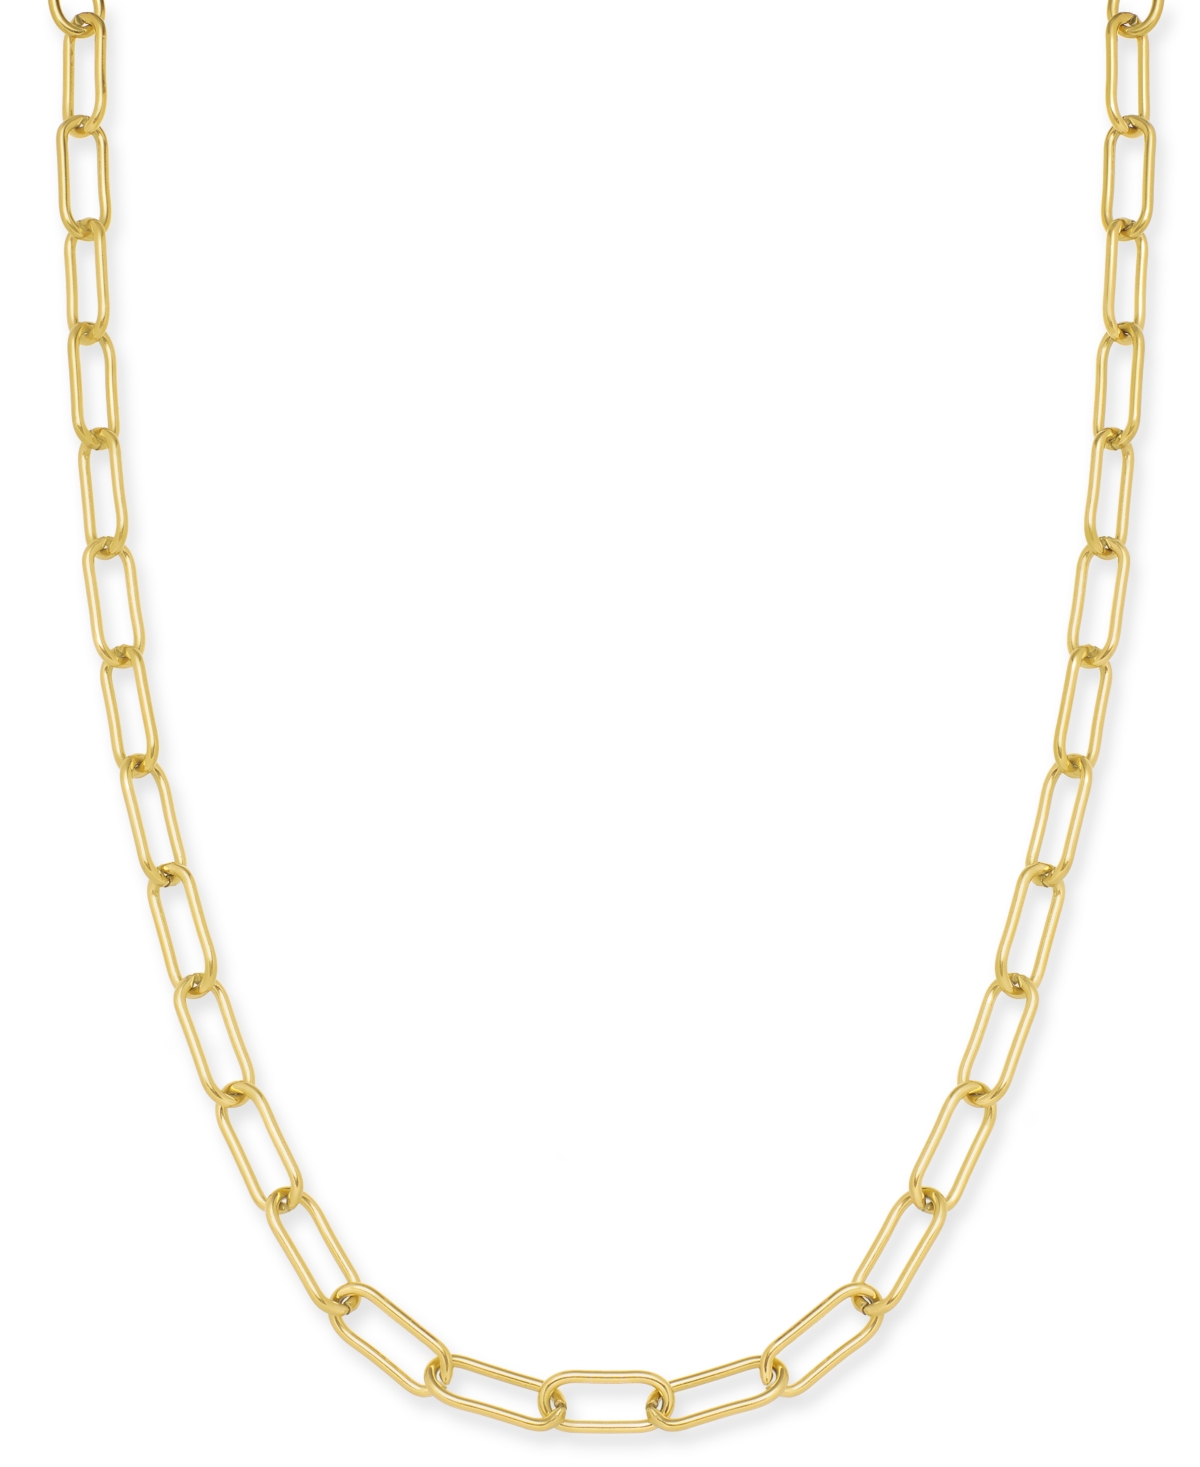 18k Gold-Plated Stainless Steel Paperclip Chain 18" Collar Necklace - Gold